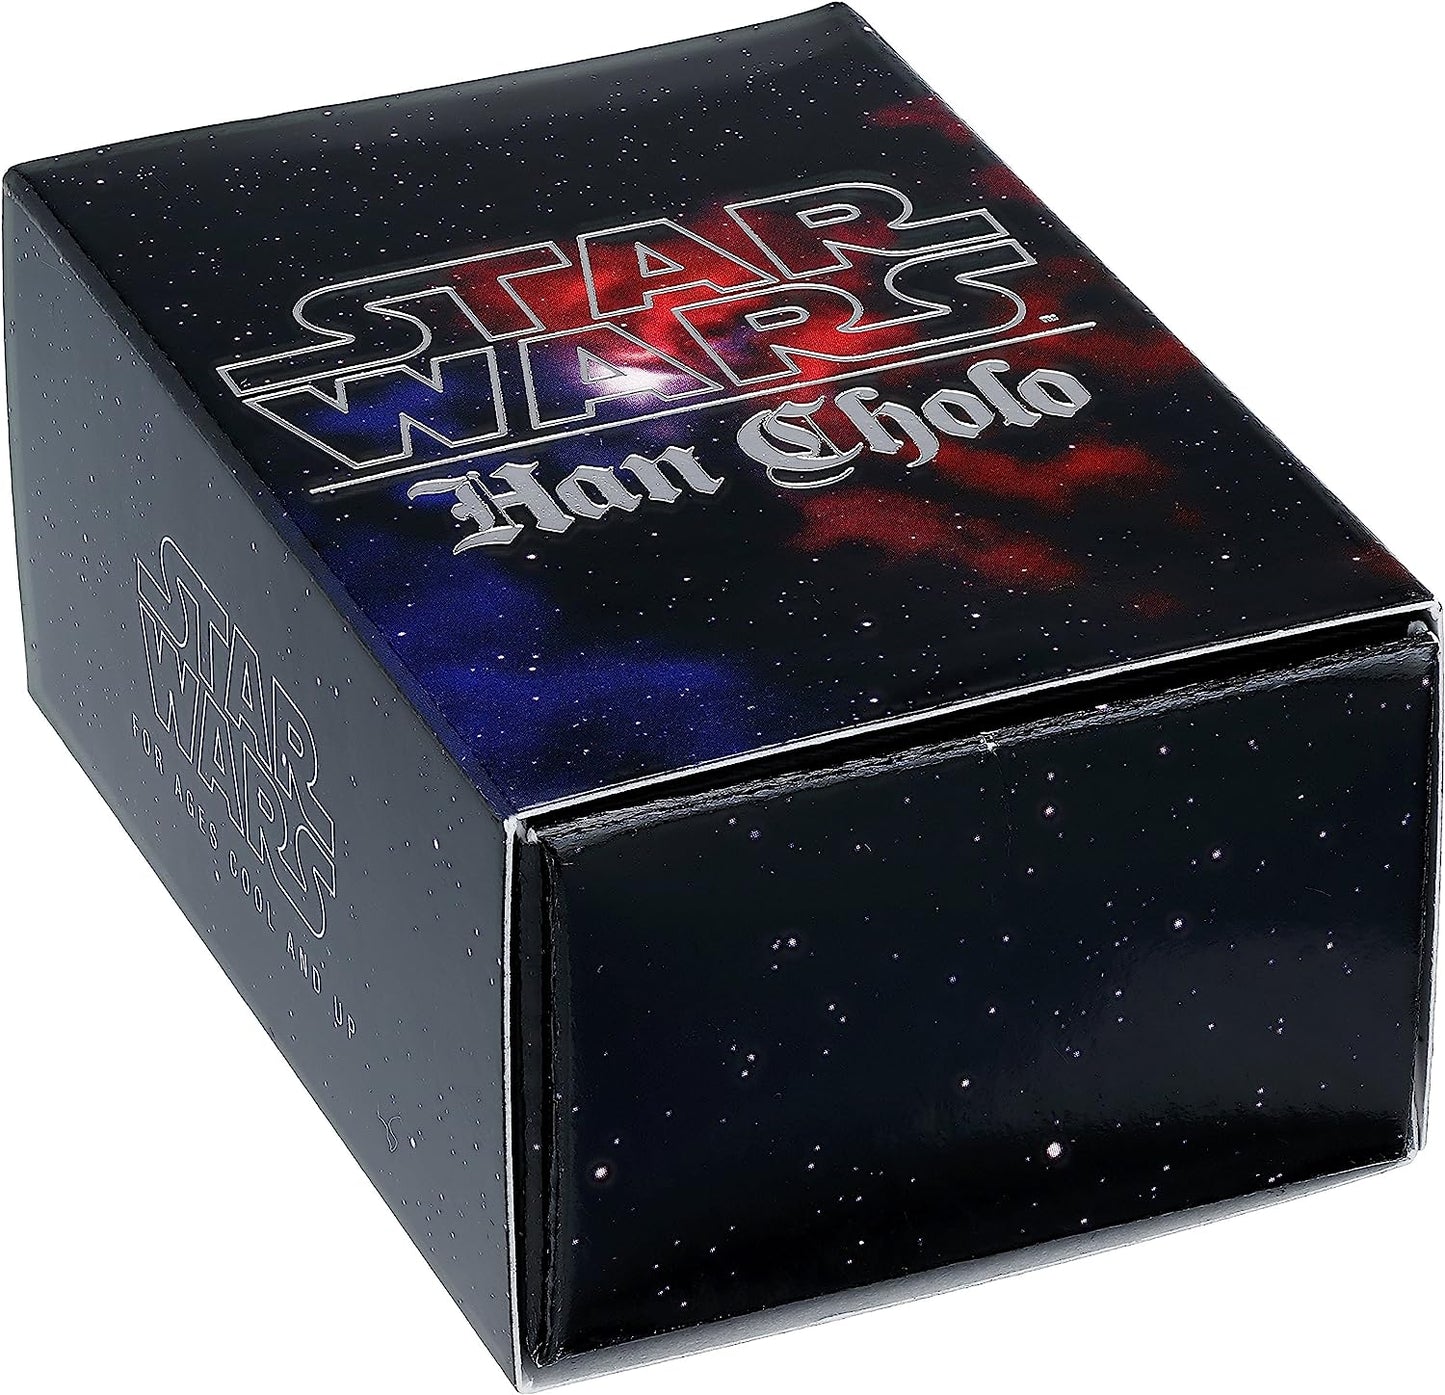 Star Wars x Han Cholo, Darth Vader Stainless Steel Ring